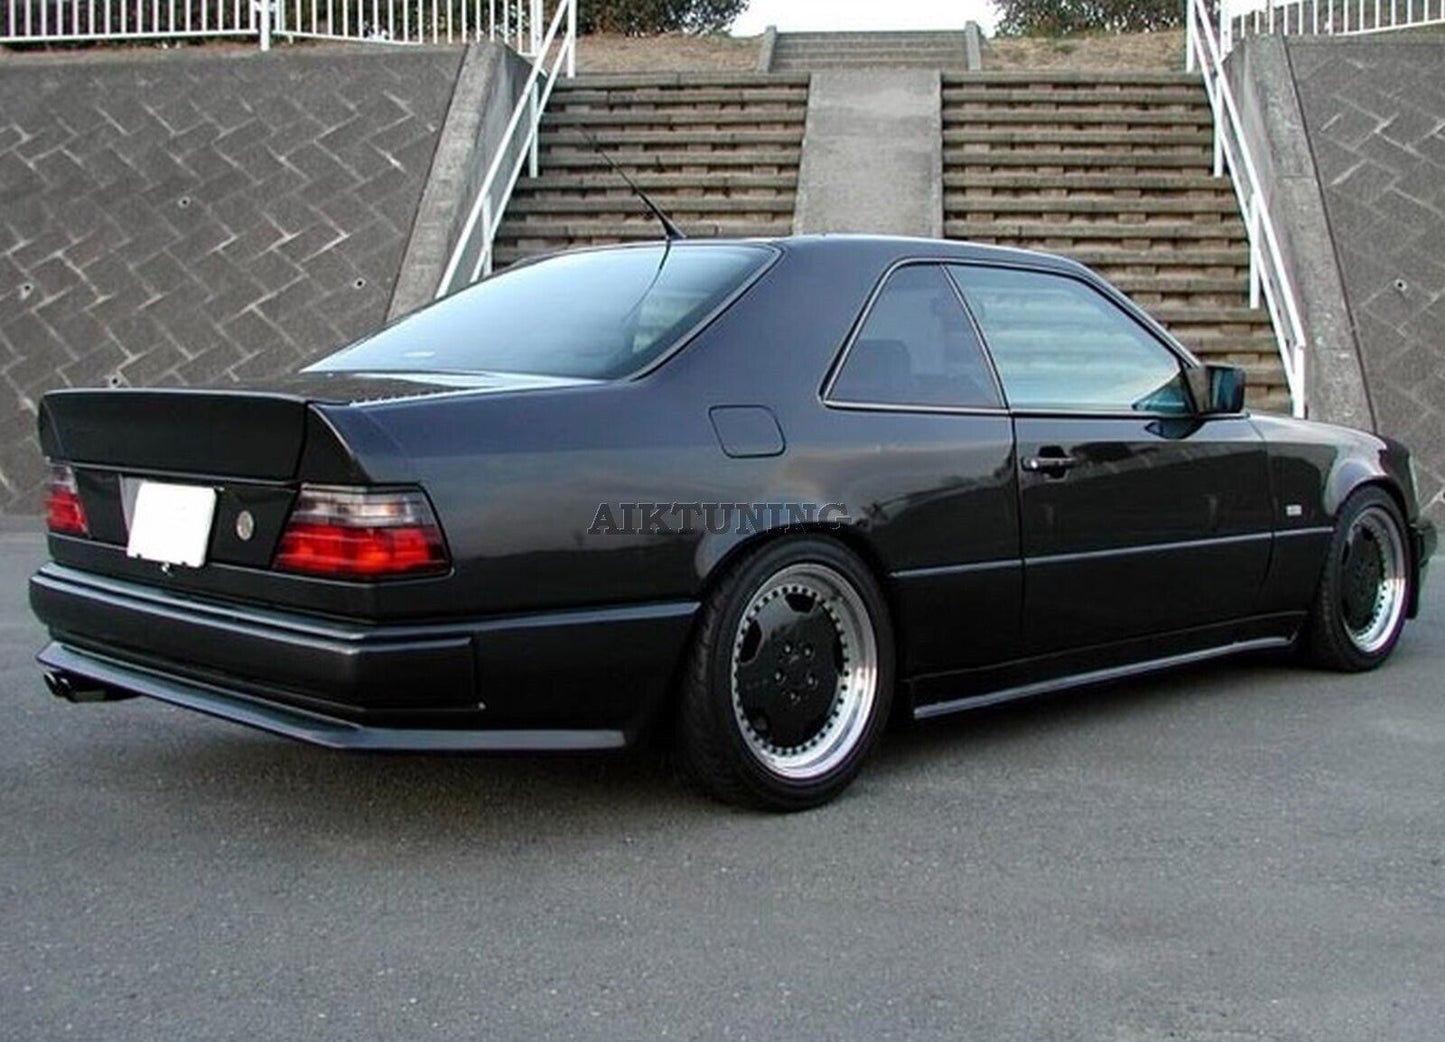 Full Body Kit Gen 2 Coupe (Fits All Mercedes Benz W124 Coupe AMG)